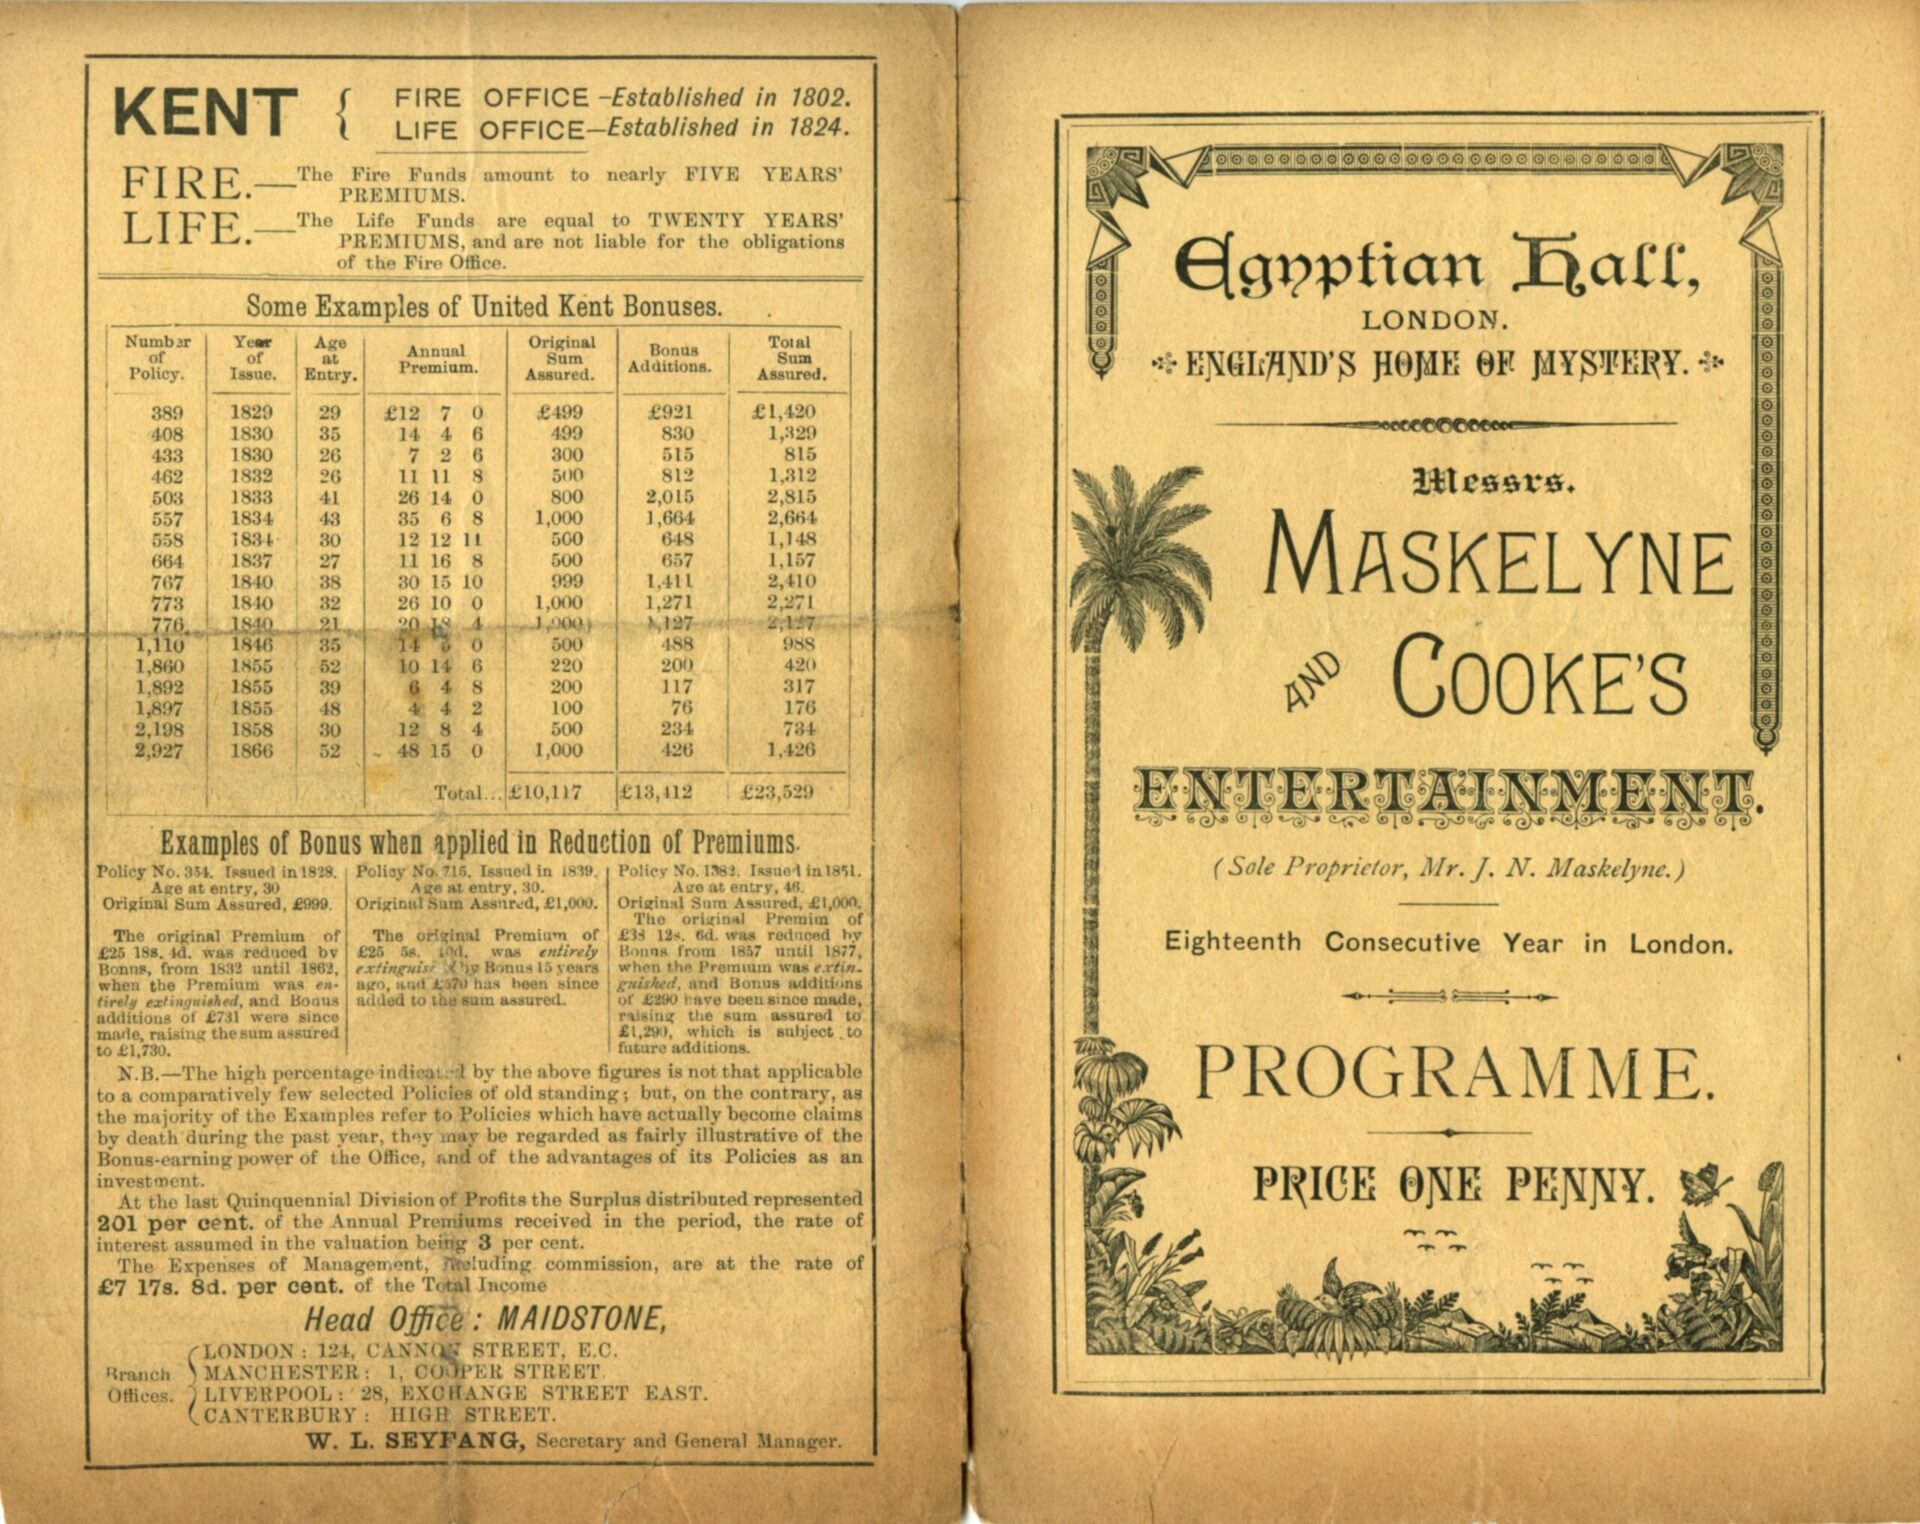 Maskelyne and Cooke programme for the Egyptian Hall, 18th consecutive year